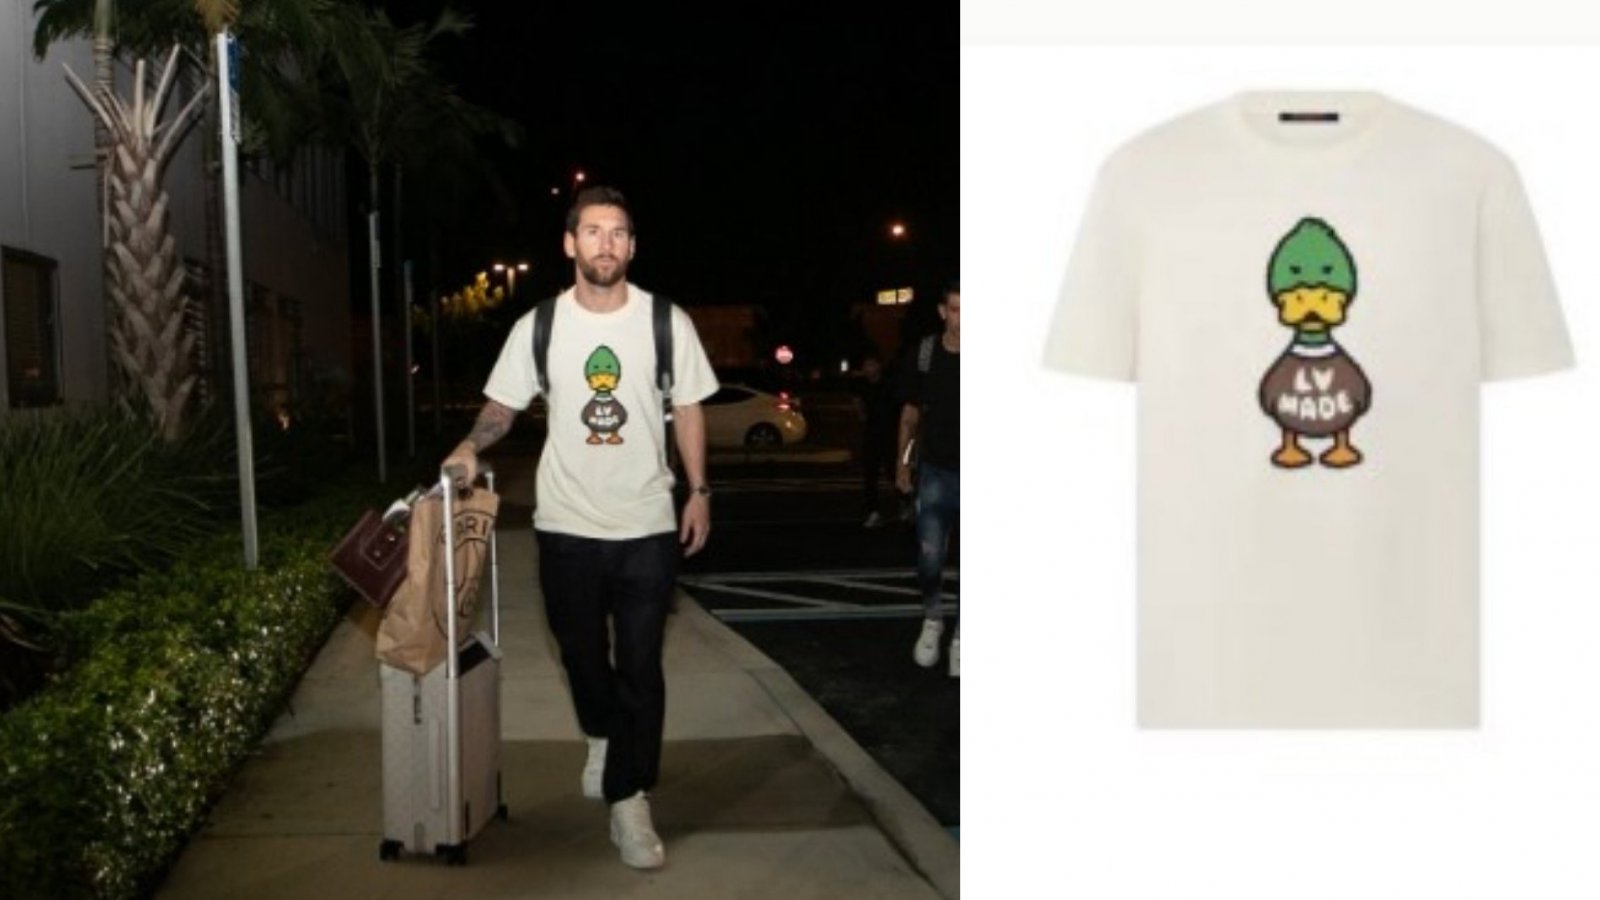 Lv made the lionel Messi duck t-shirt